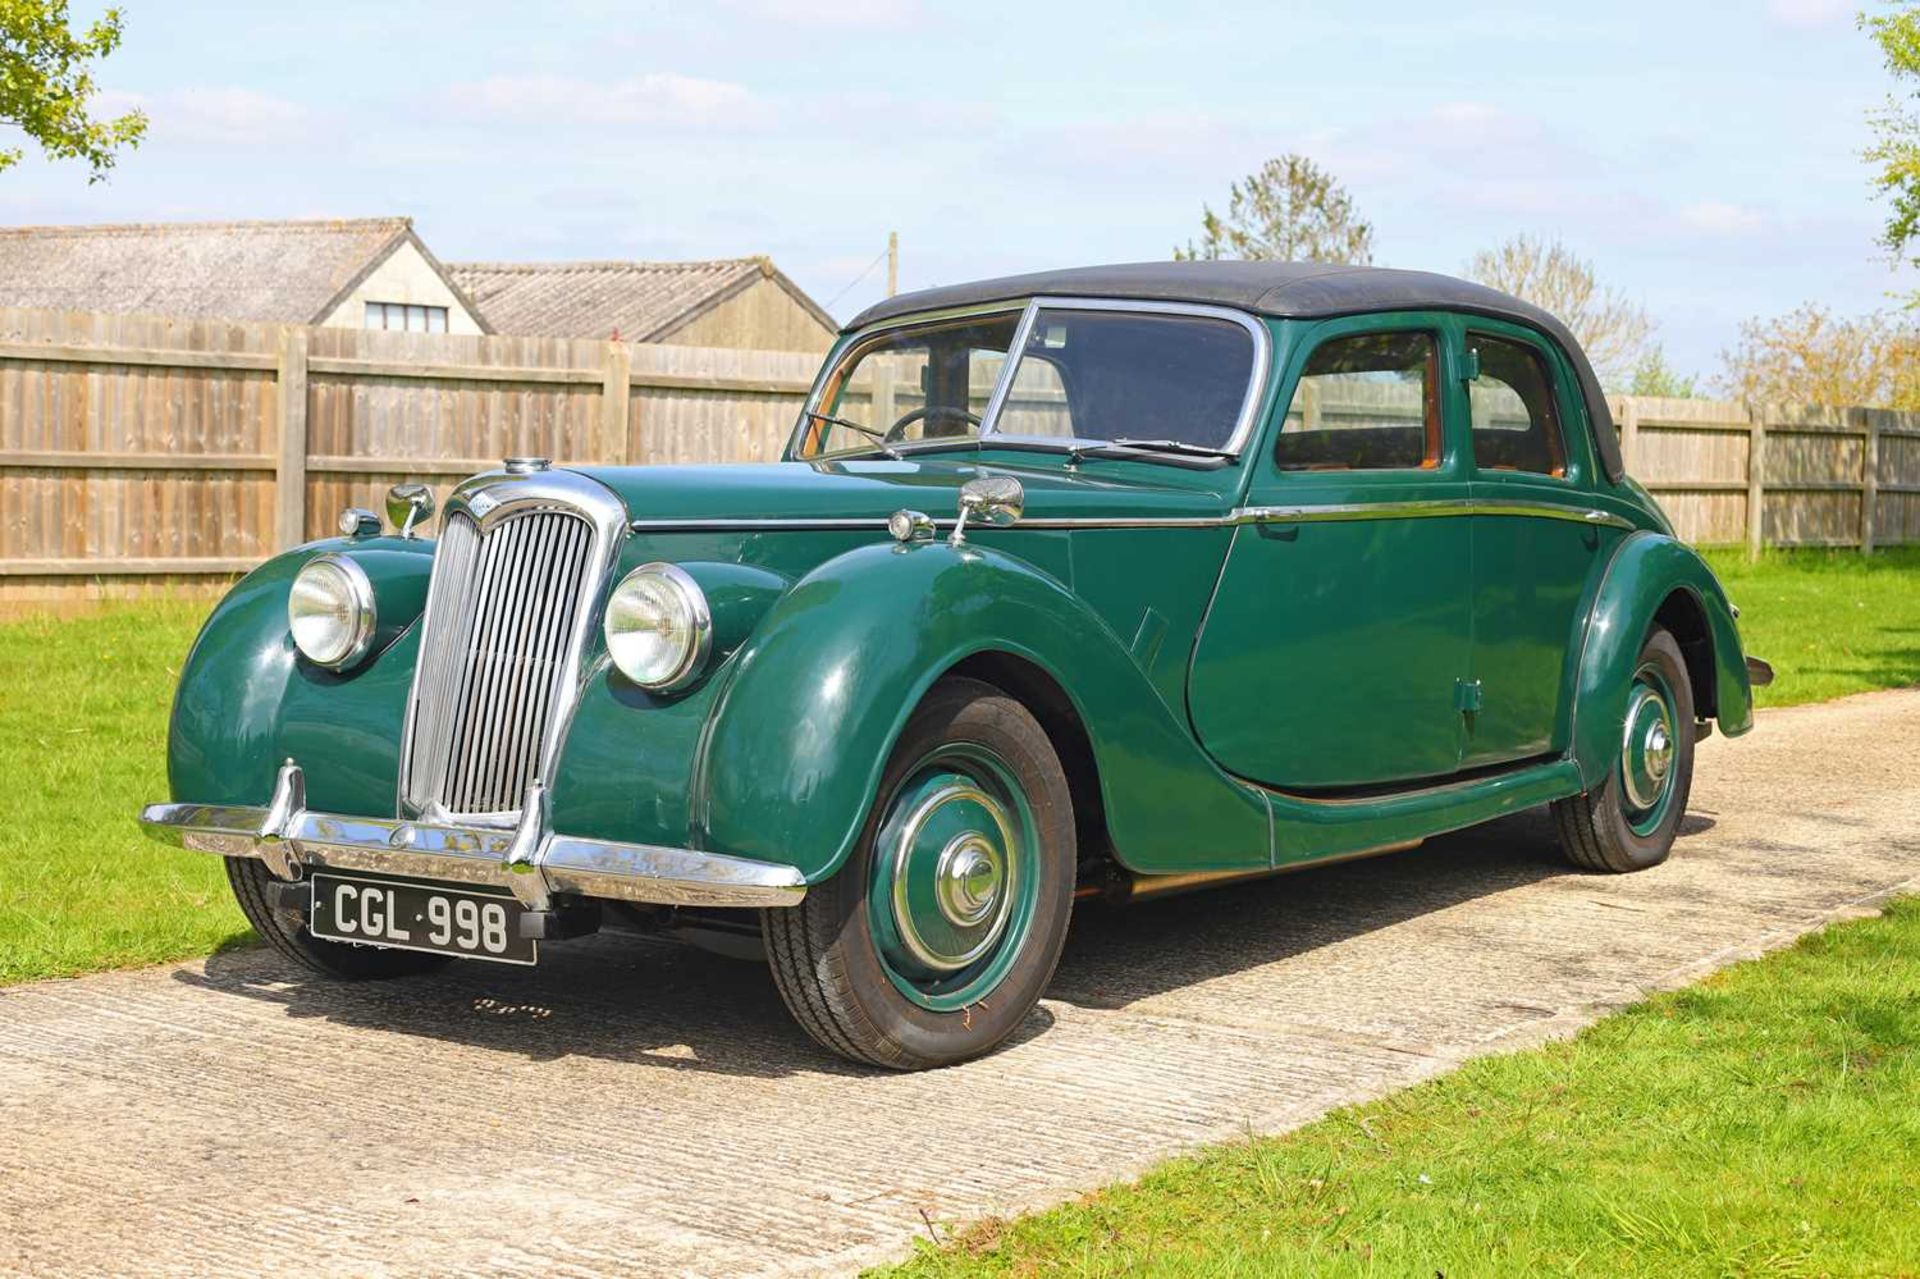 1952 Riley RMB 2½ litre Saloon - Image 3 of 53